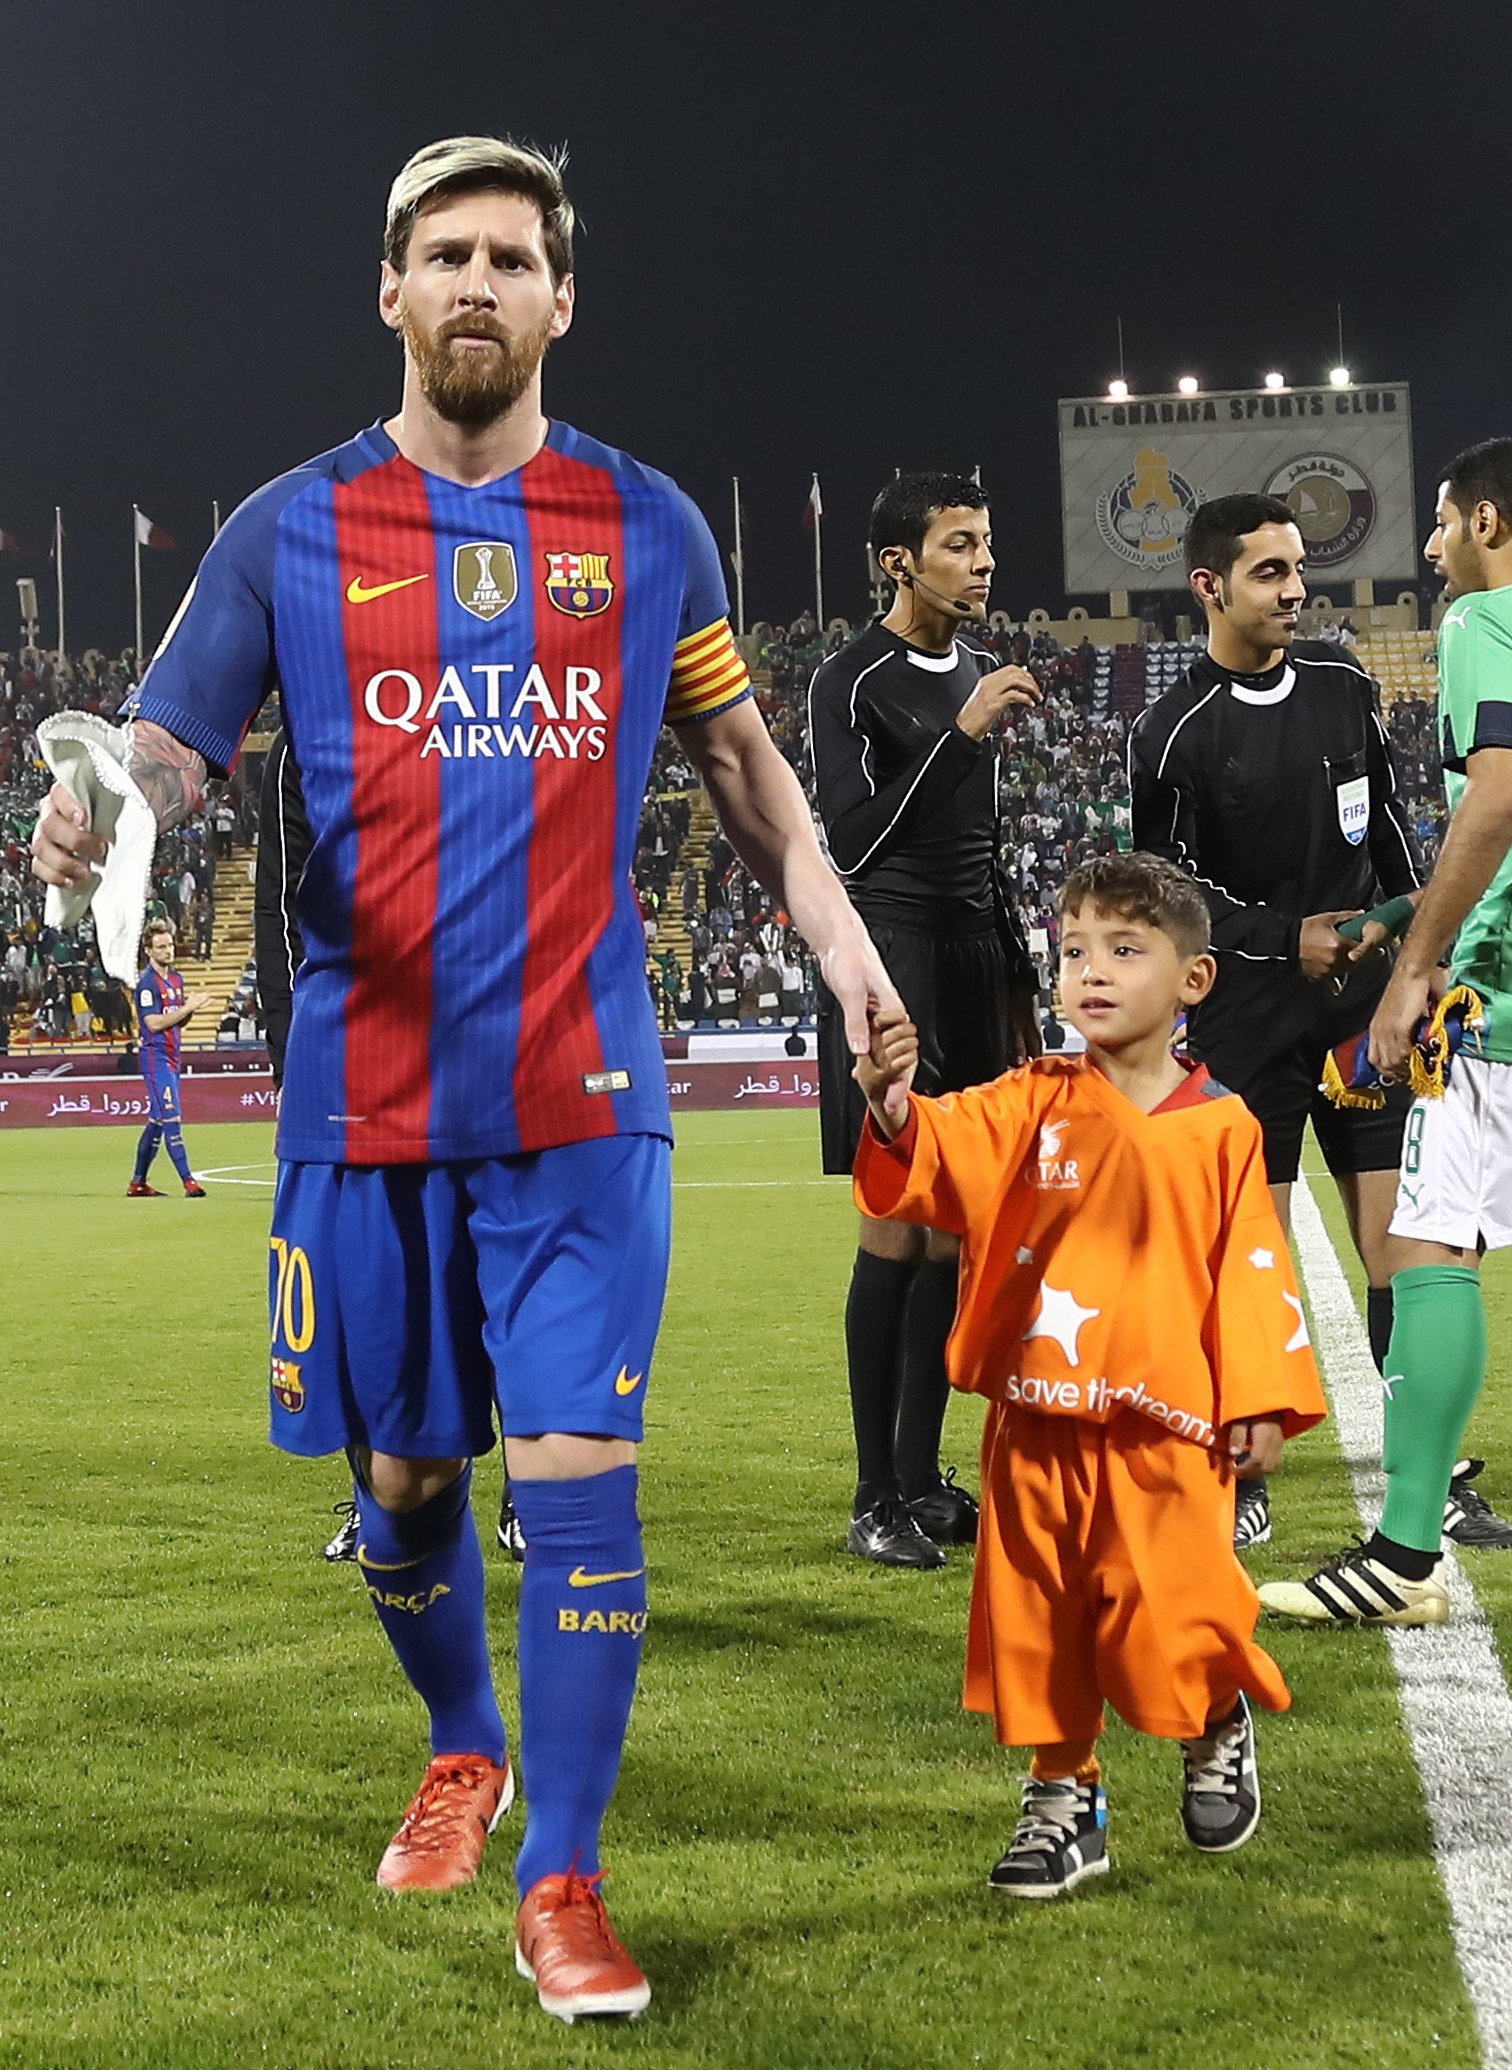 BTA :: World-famous Footballer Lionel Messi Gifts Jersey to